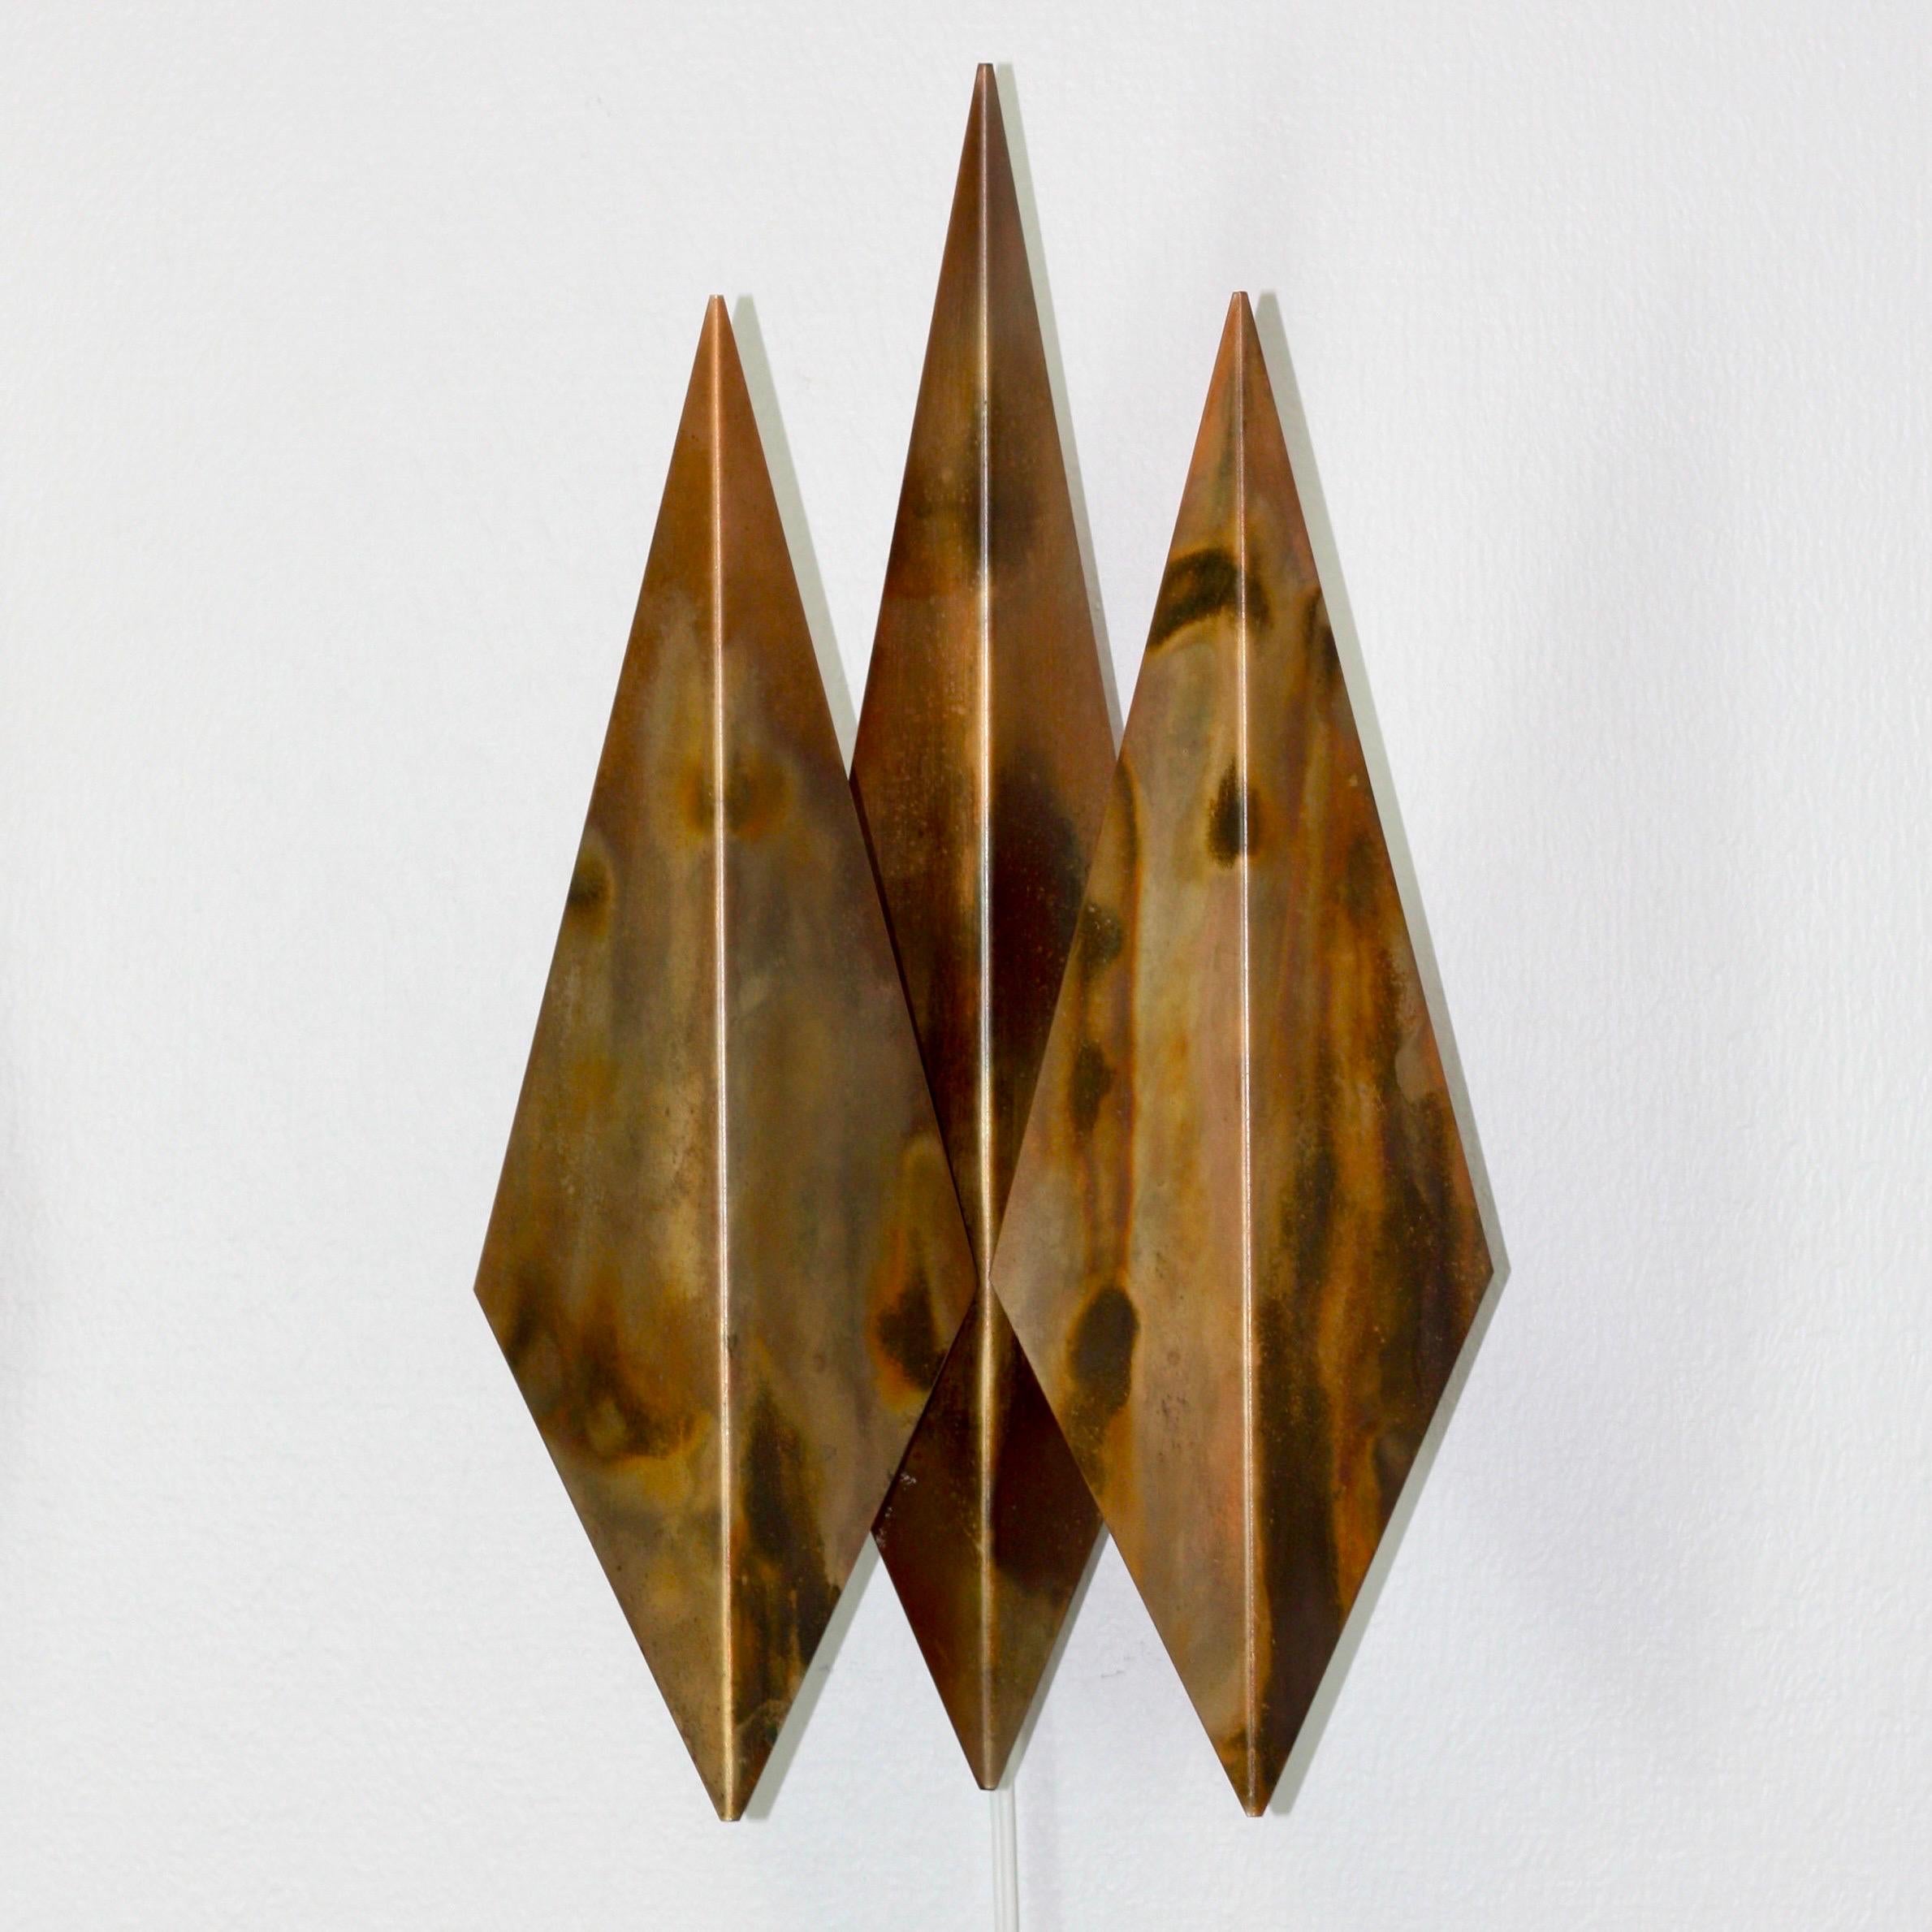 Pair of Copper Wall Lamps by Svend Aage Holm Sorensen, 1960s, Denmark For Sale 1